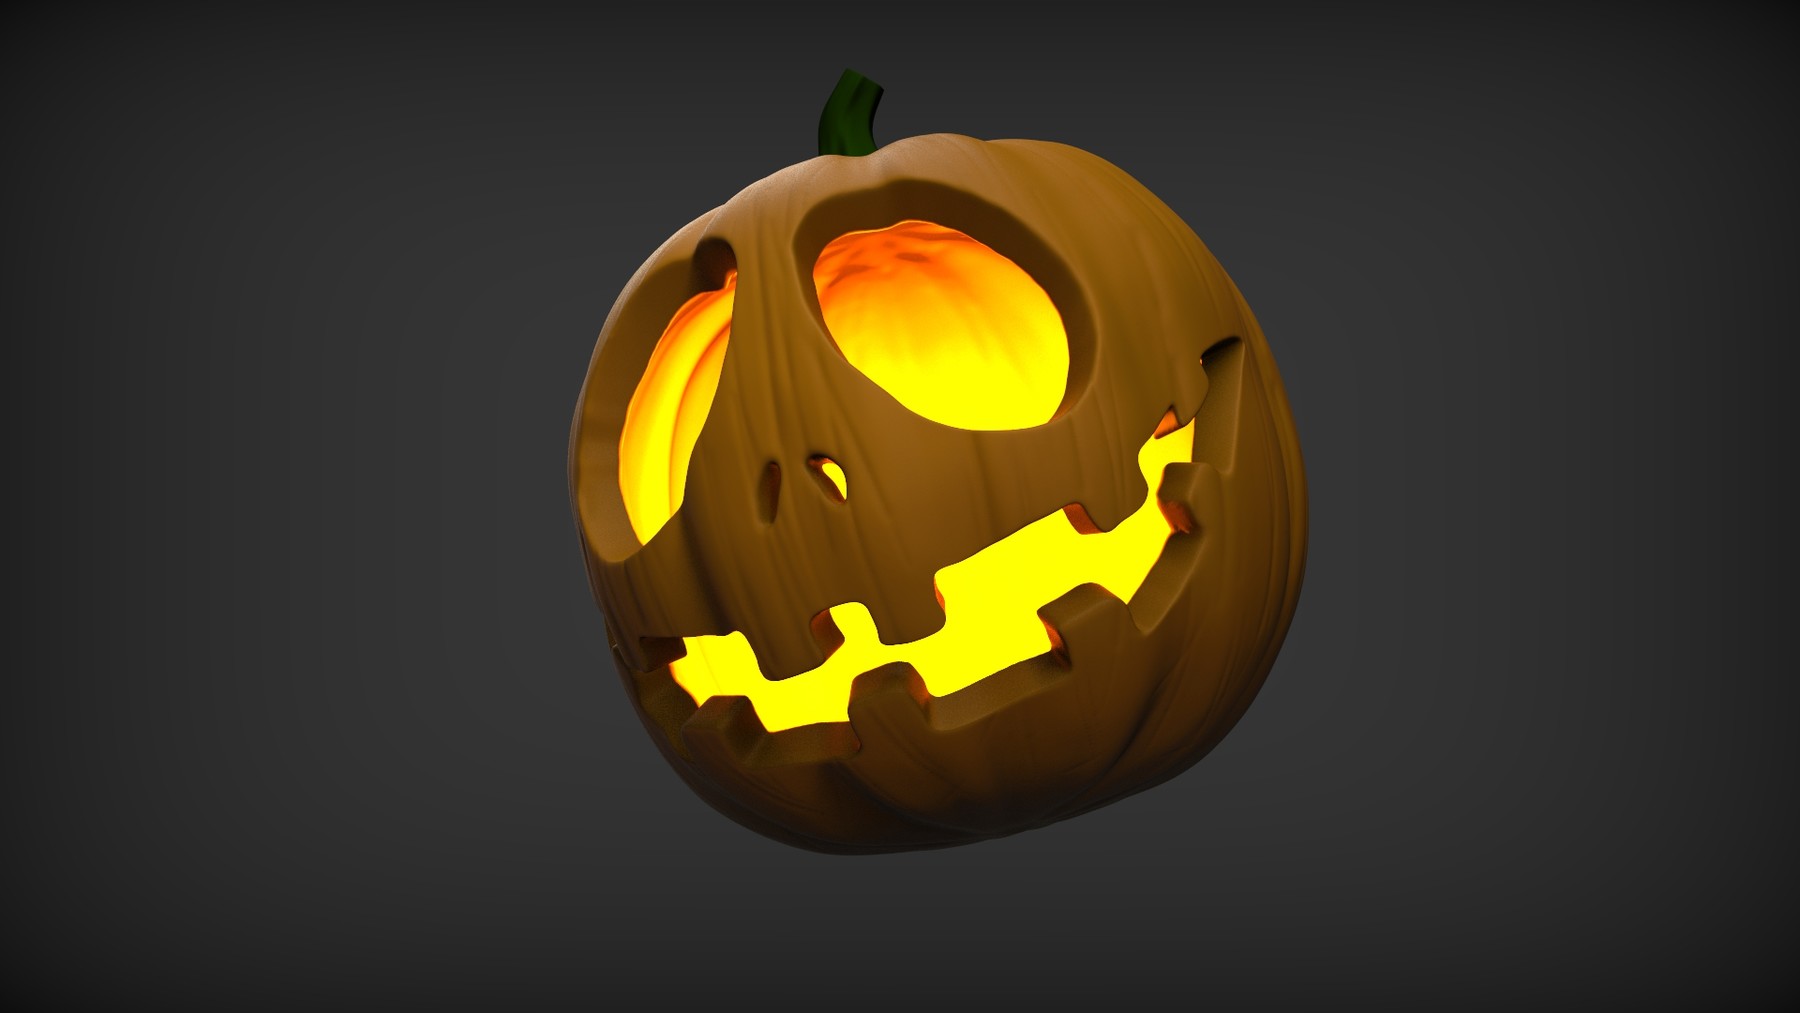 ArtStation Sculpt And Paint Your Very Own 3D Printable Halloween